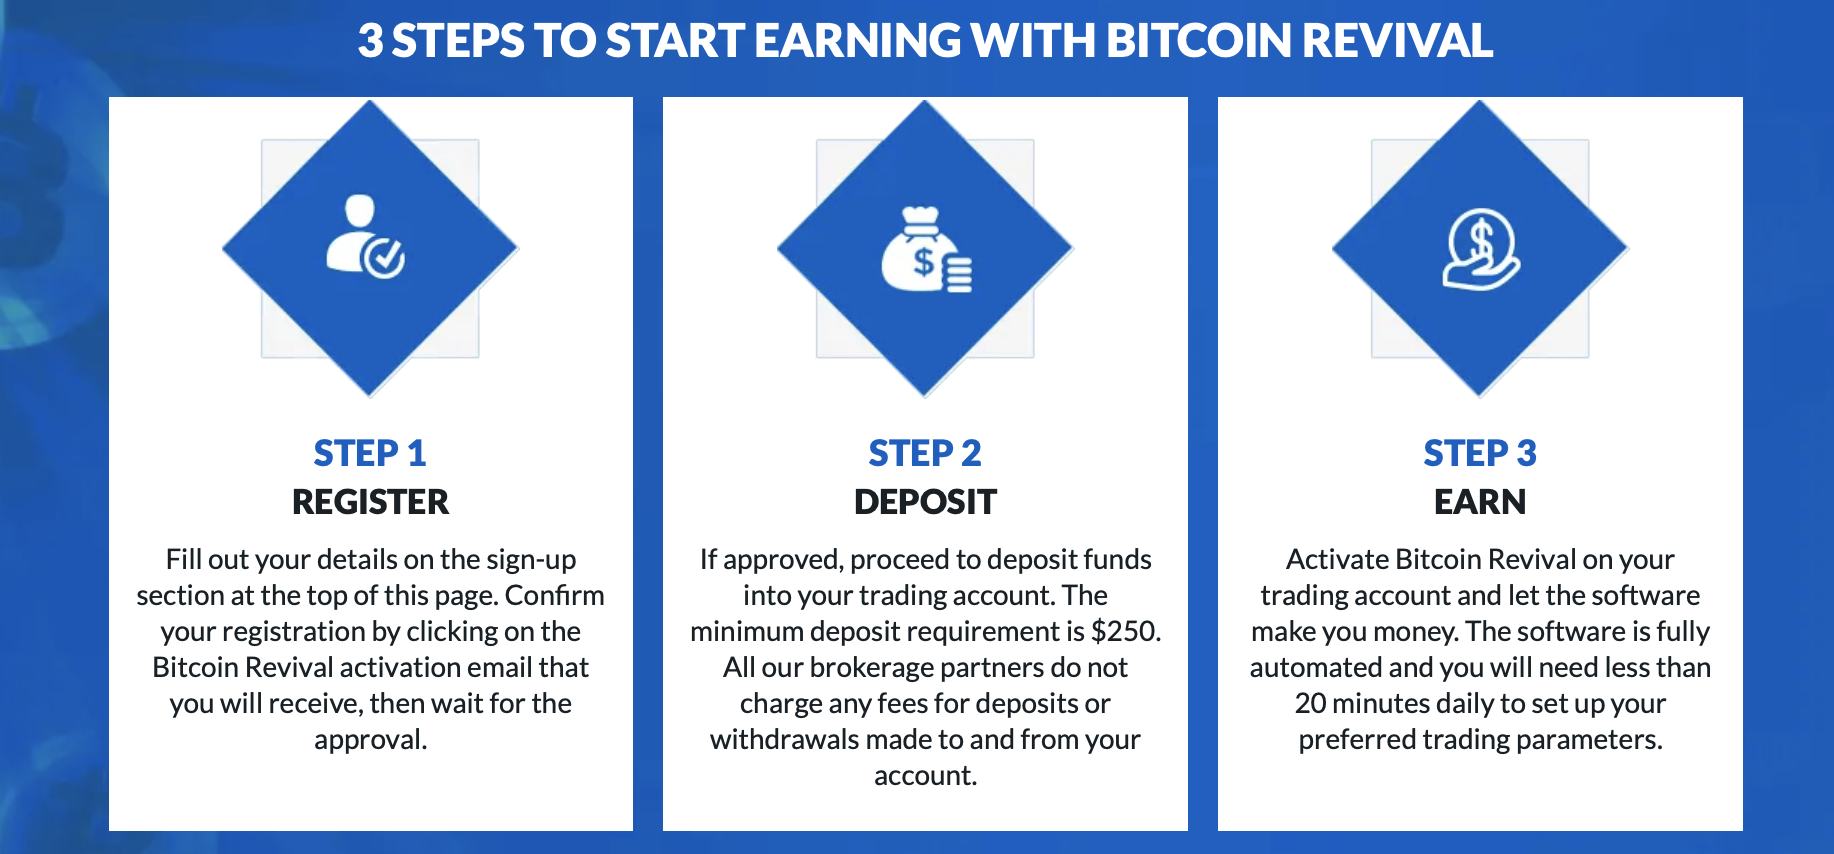 Steps to earn with Bitcoin Revival